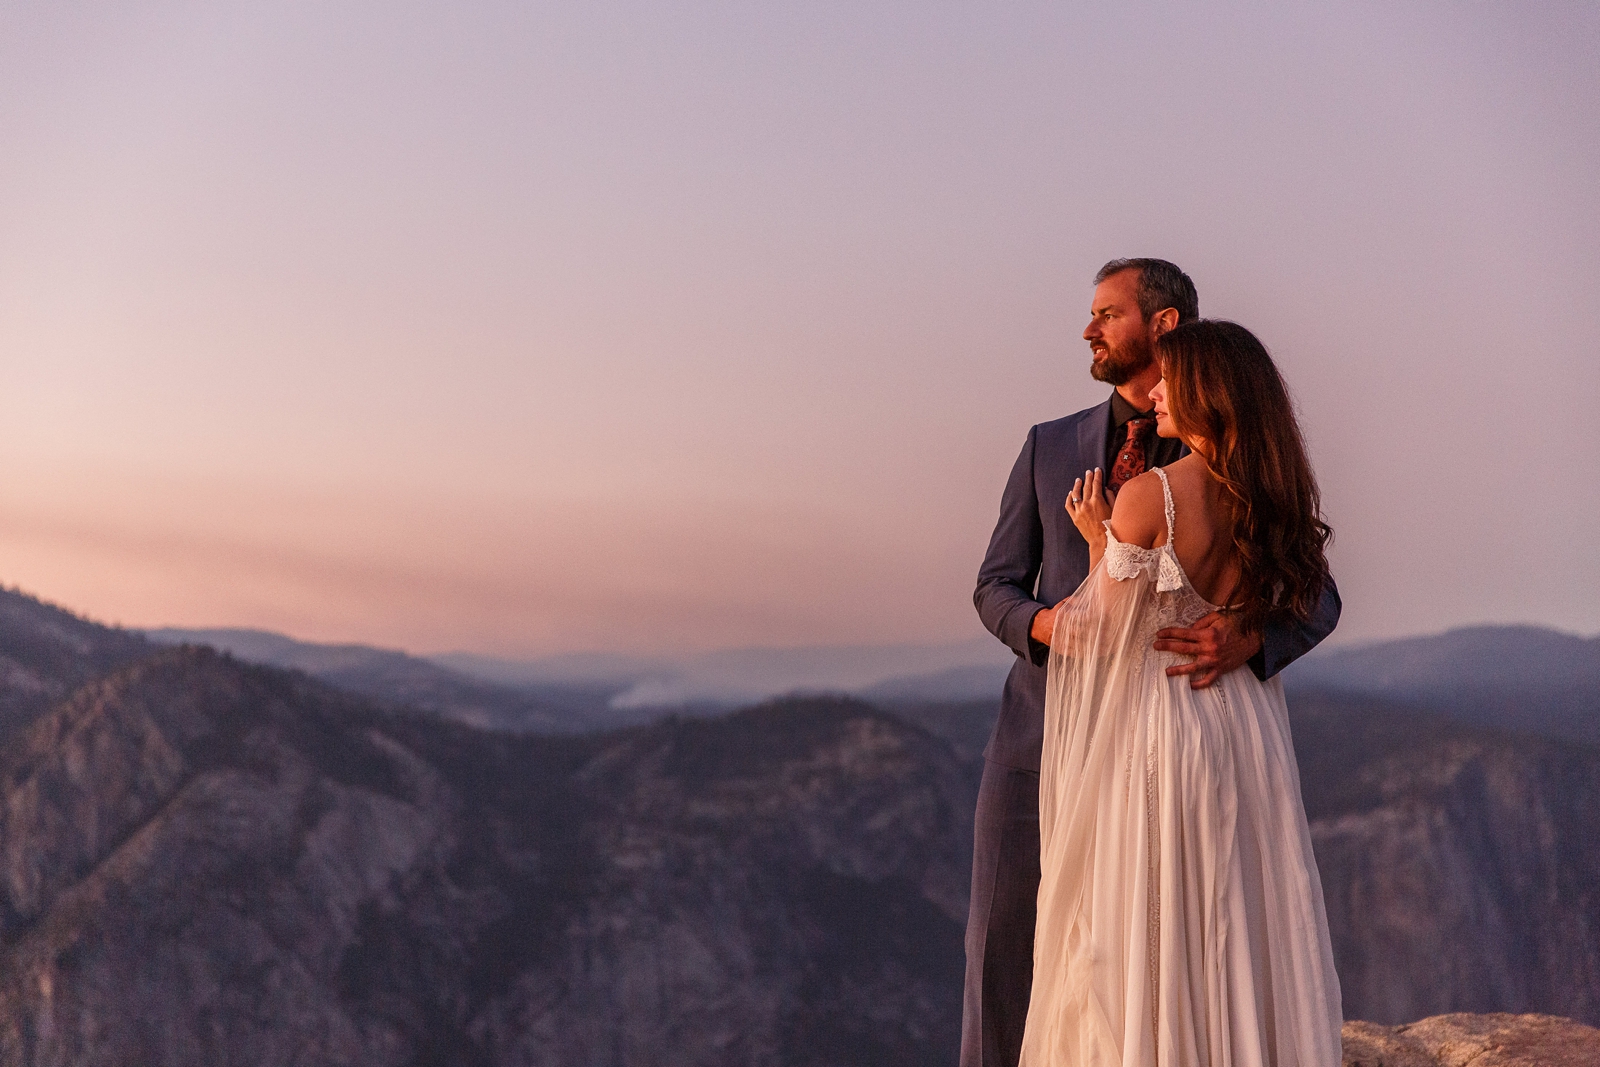 This couple eloped at pink hour sunset in Yosemite.